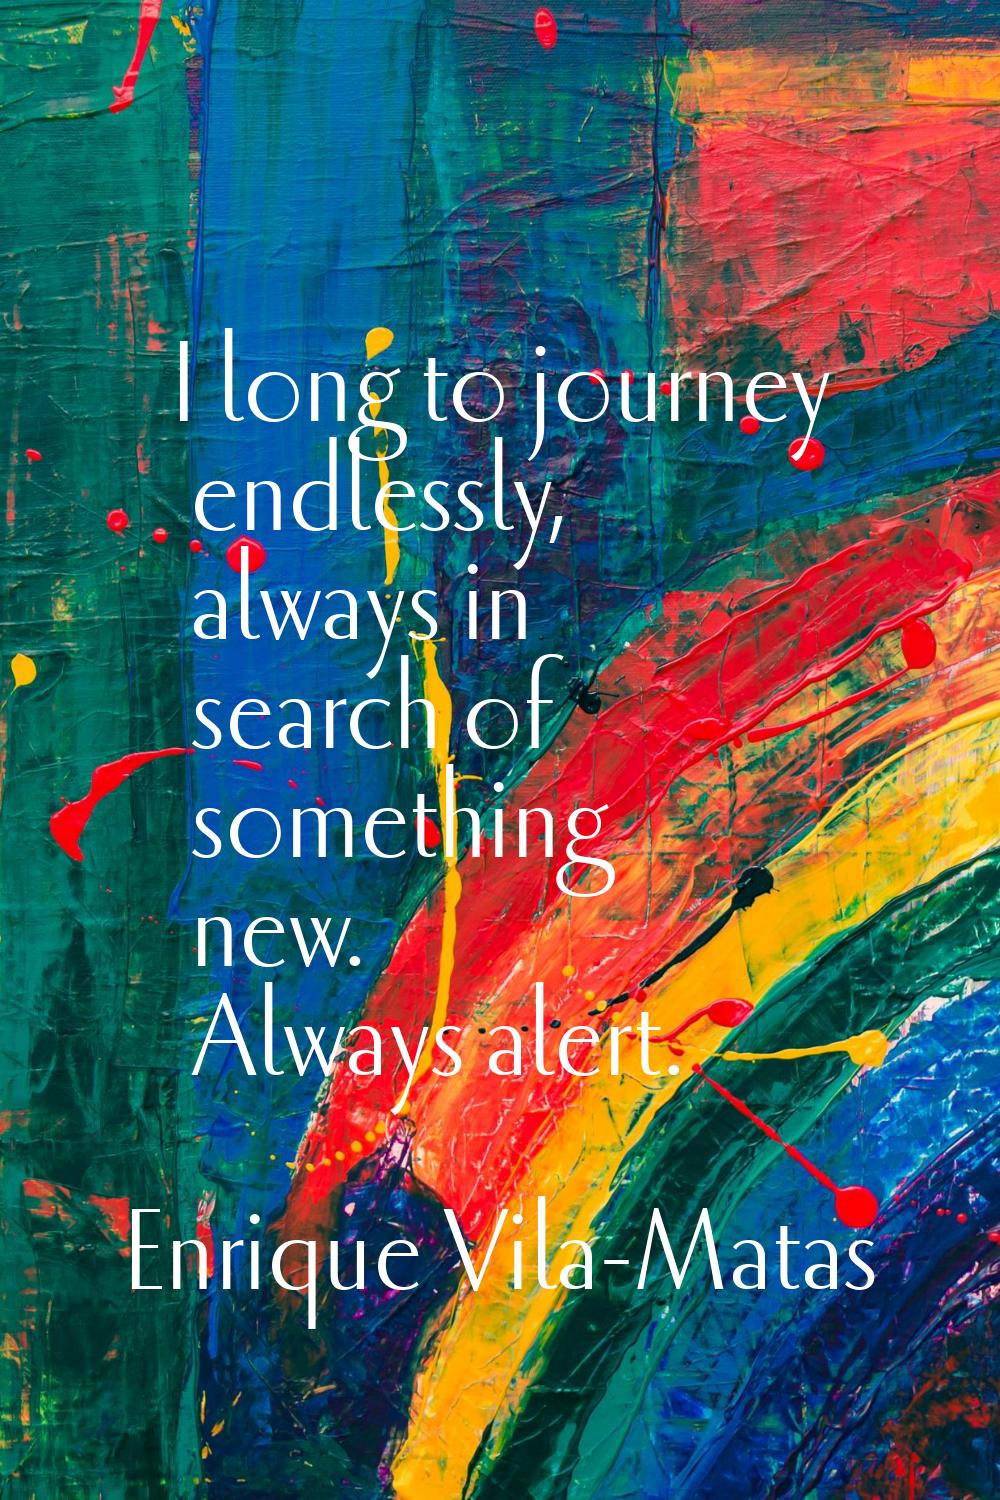 I long to journey endlessly, always in search of something new. Always alert.